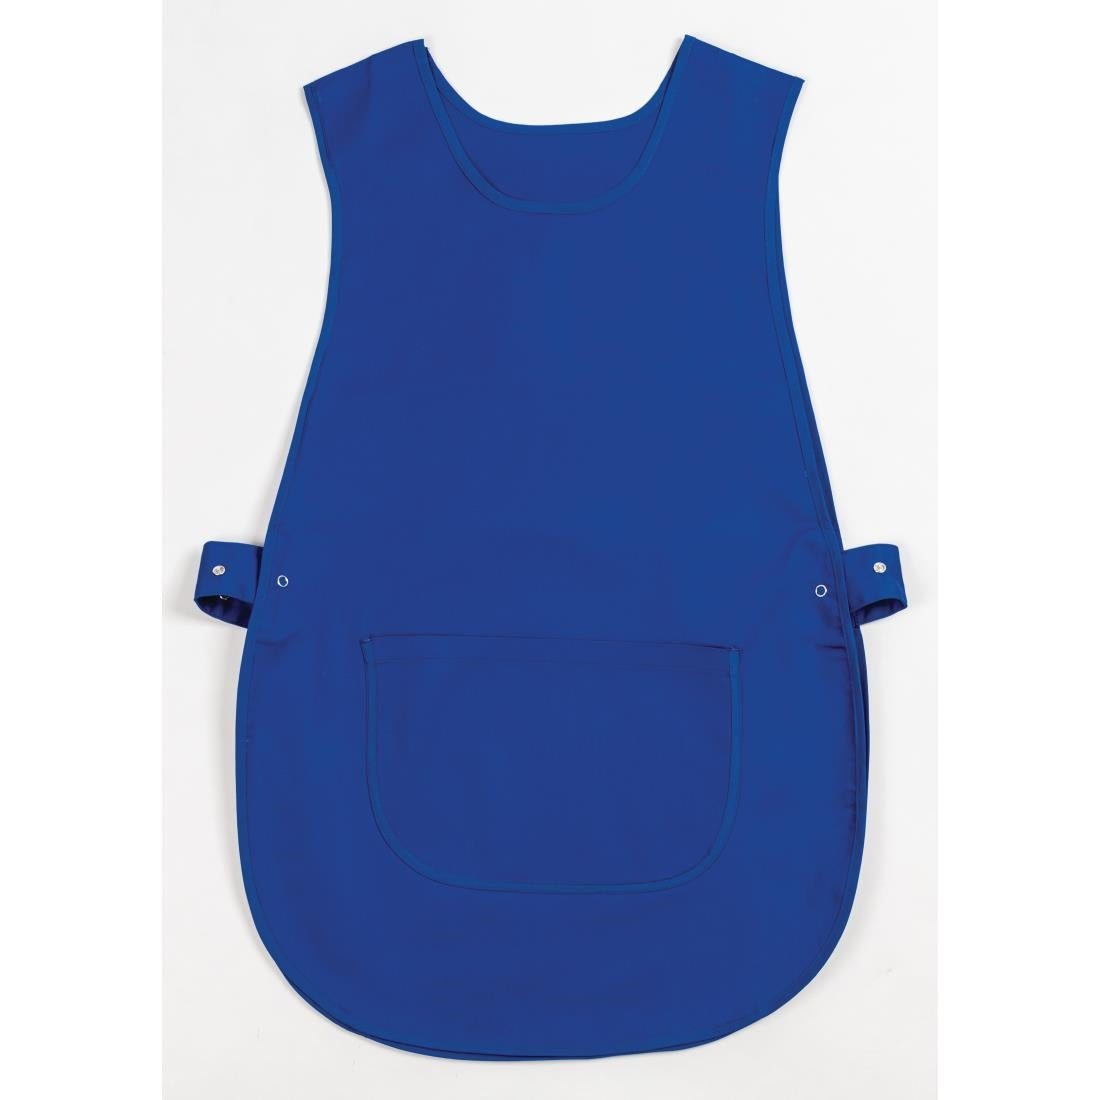 B043 Whites Tabard With Pocket Royal Blue JD Catering Equipment Solutions Ltd